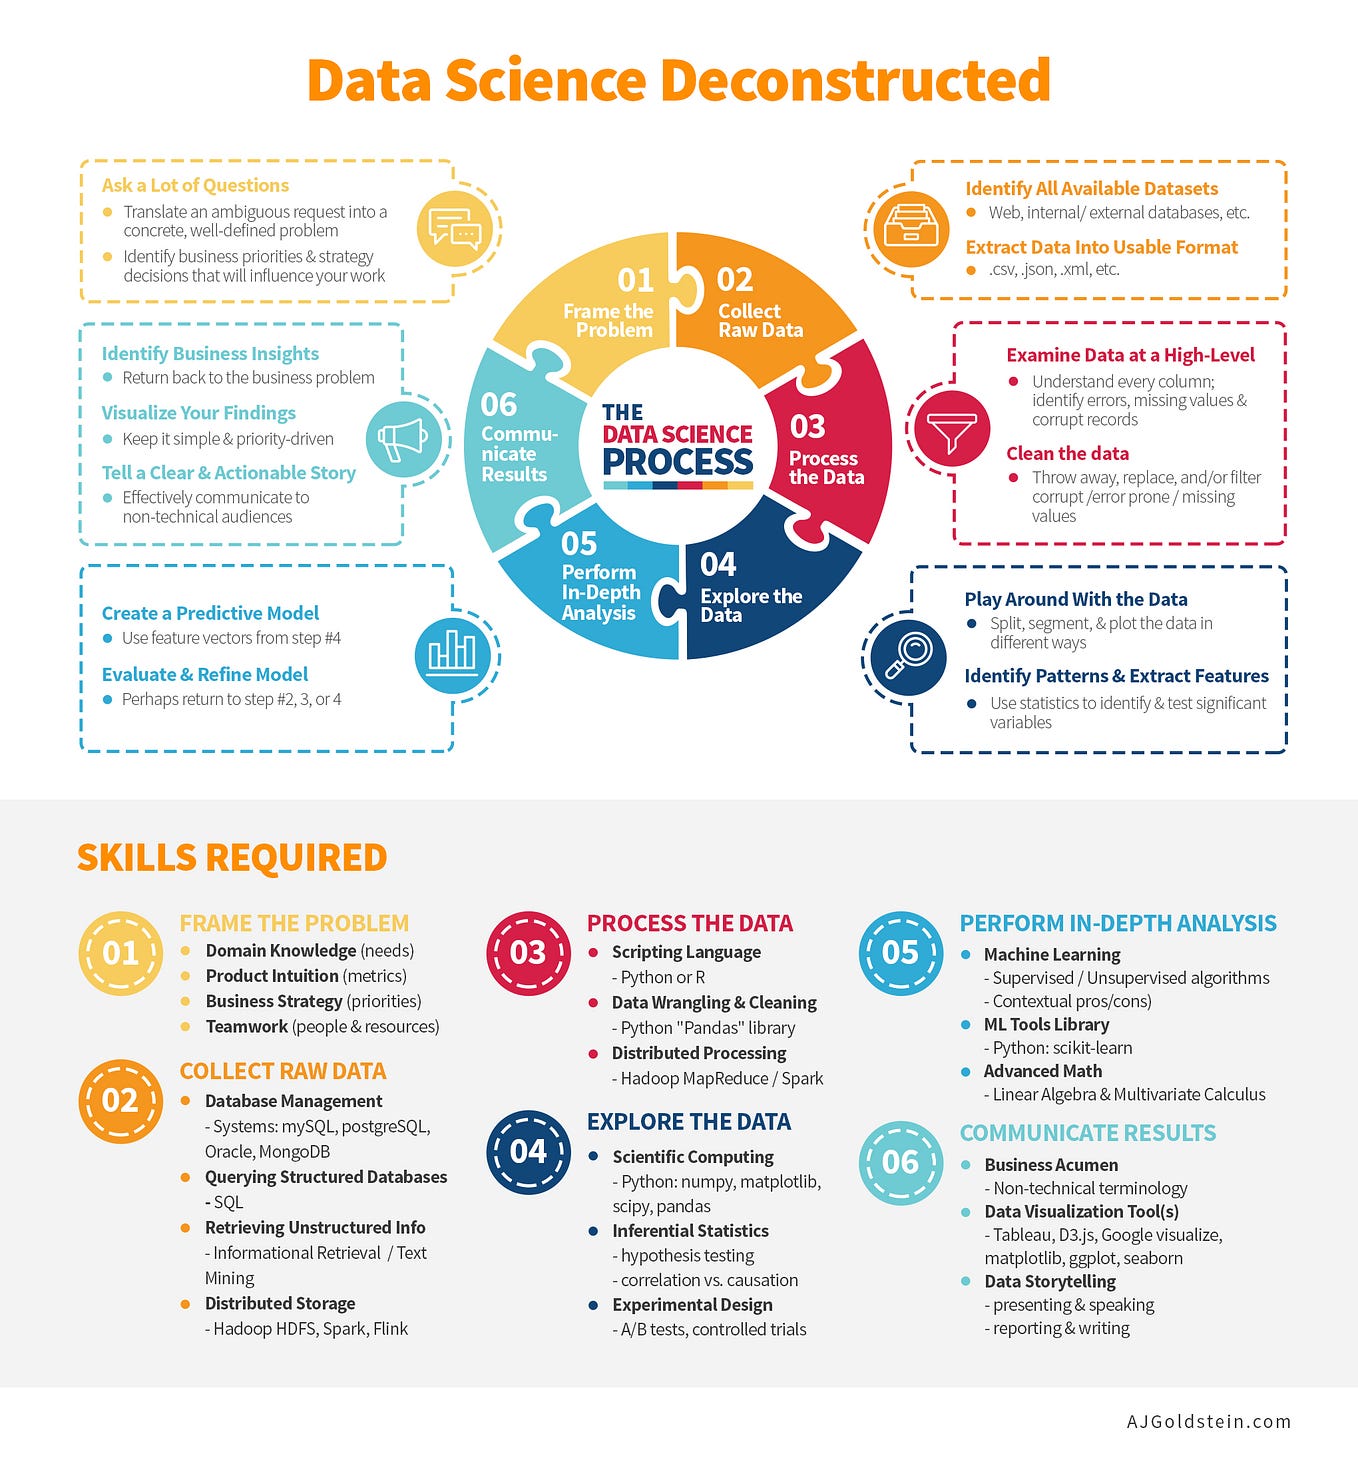 Deconstructing Data Science: Breaking The Complex Craft Into It’s Simplest Parts